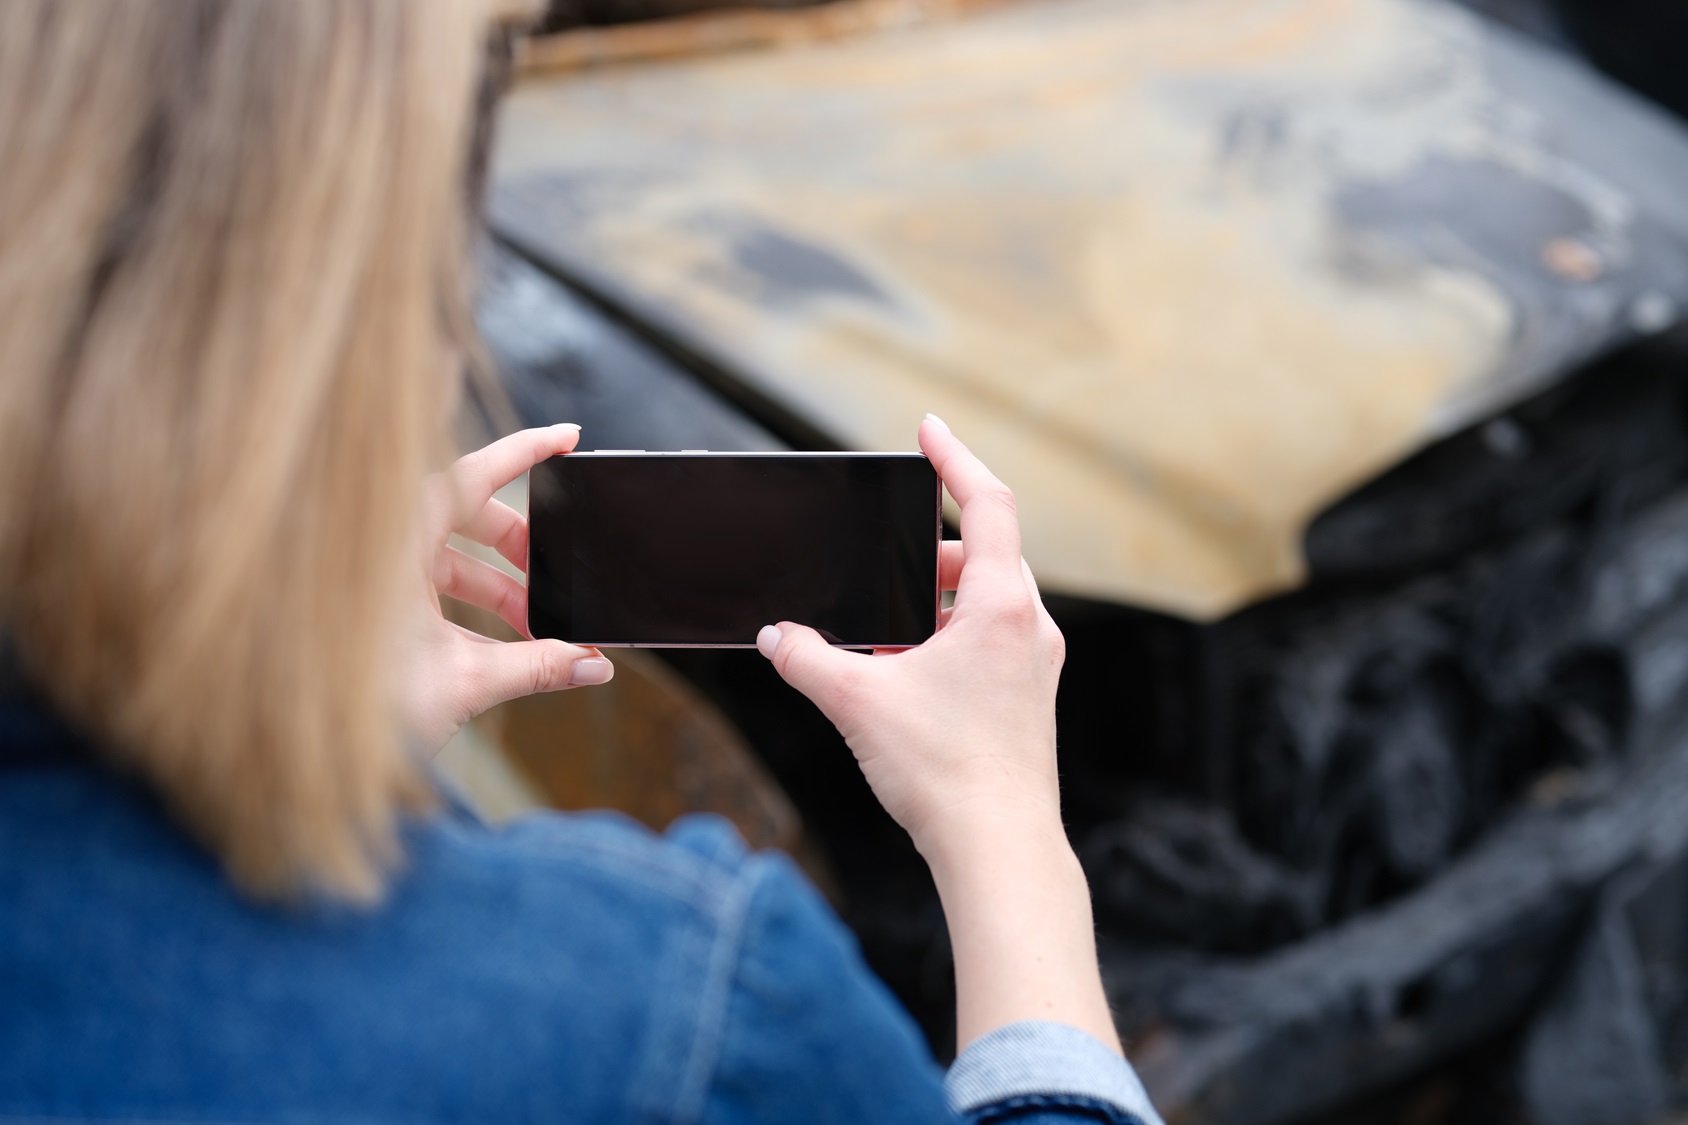 insurance-agent-woman-photographs-burnedout-car-on-smartphone